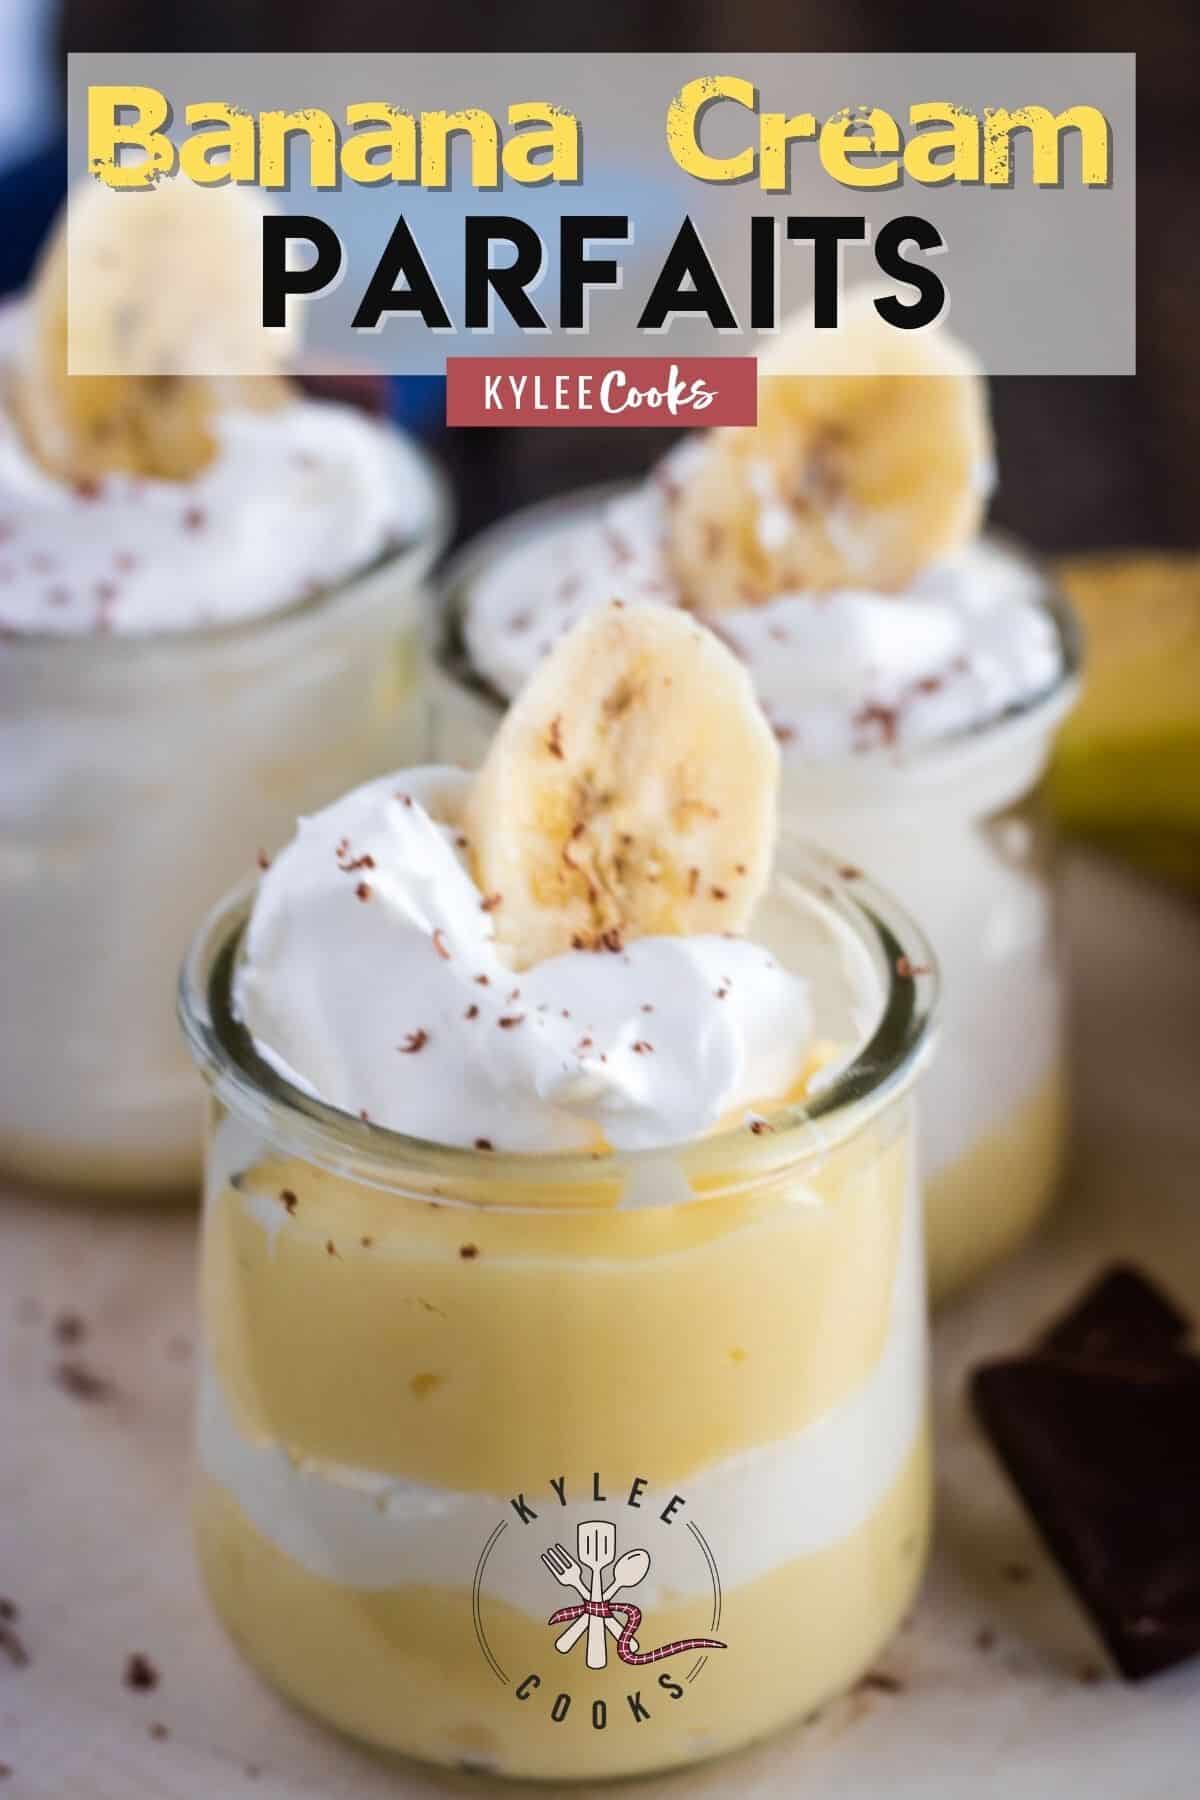 banana cream parfaits with recipe name overlaid in text